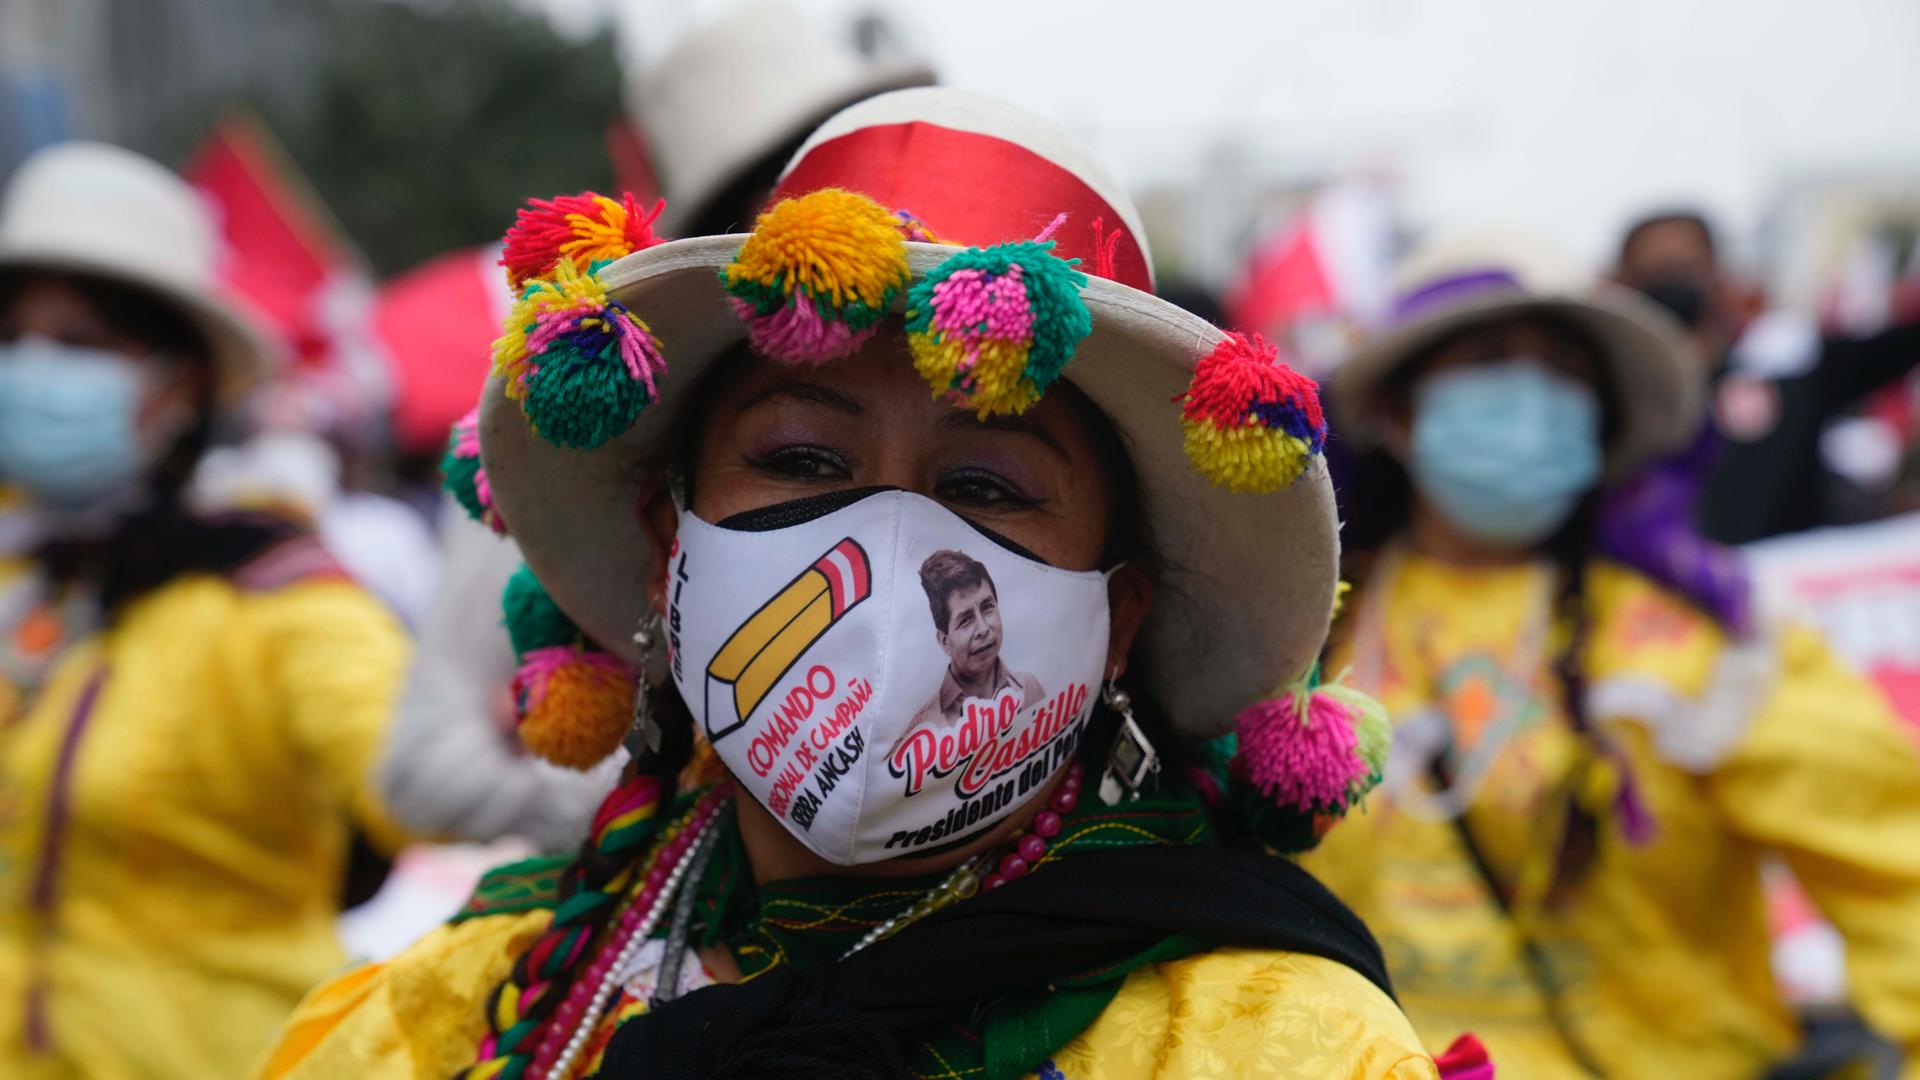 People march in support of presidential candidate Pedro Castillo weeks after the presidential runoff election, in Lima, Peru, June 26, 2021. With all the votes tallied from the June 6th presidential runoff, Castillo is ahead of his rival candidate Keiko F